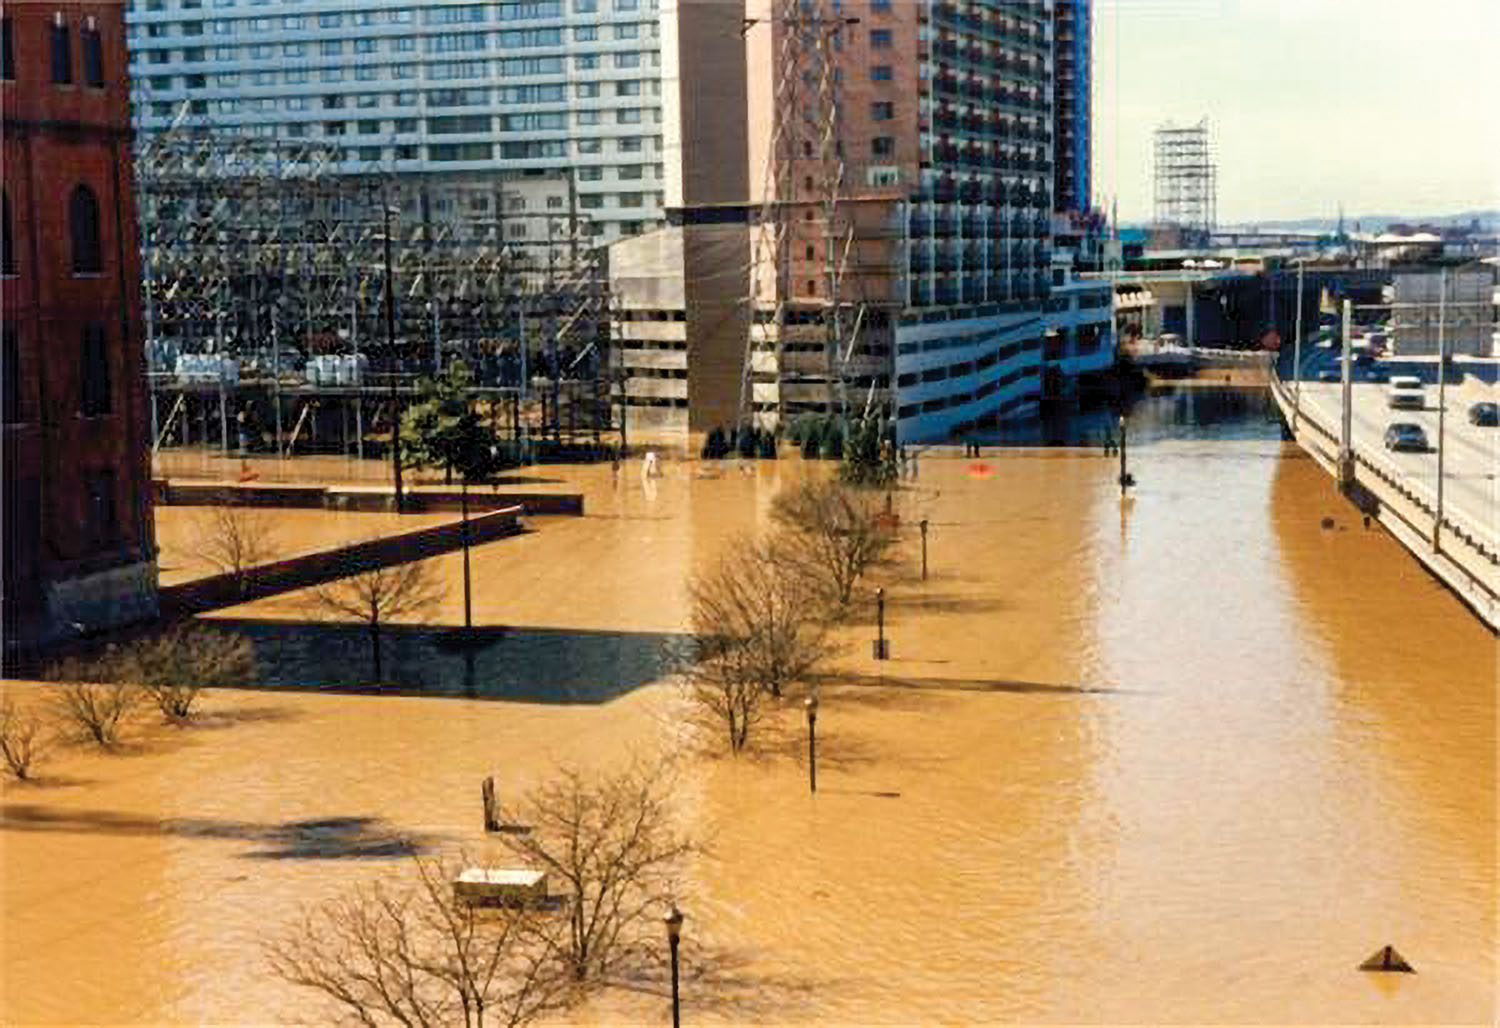 The flood of 1997 was the largest flood since 1964 in the Ohio River Valley. The National Weather Service has created a website with photos, video interviews and facts to memorialize the flood, in which 24 people died. The Ohio River was closed for roughly 400 miles, from Cincinnati, Ohio, to Smithland, Ky., because of flooded navigational locks. This photo shows downtown Louisville, Ky. (Photo by Judy Webber, courtesy of the National Weather Service)